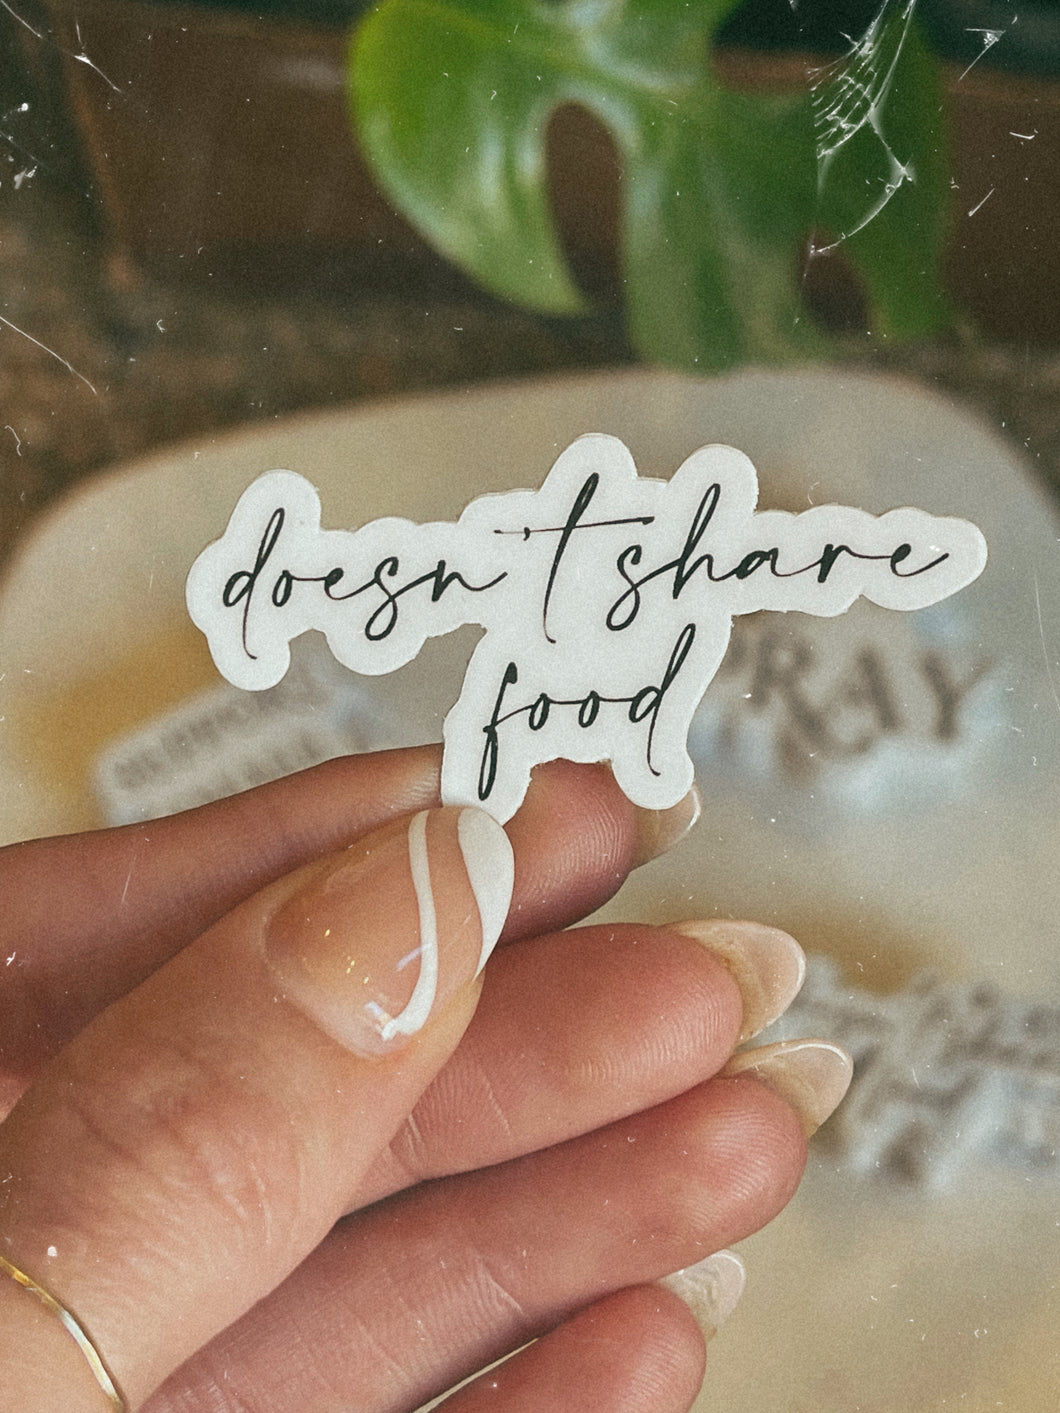 Doesn’t Share Food Sticker